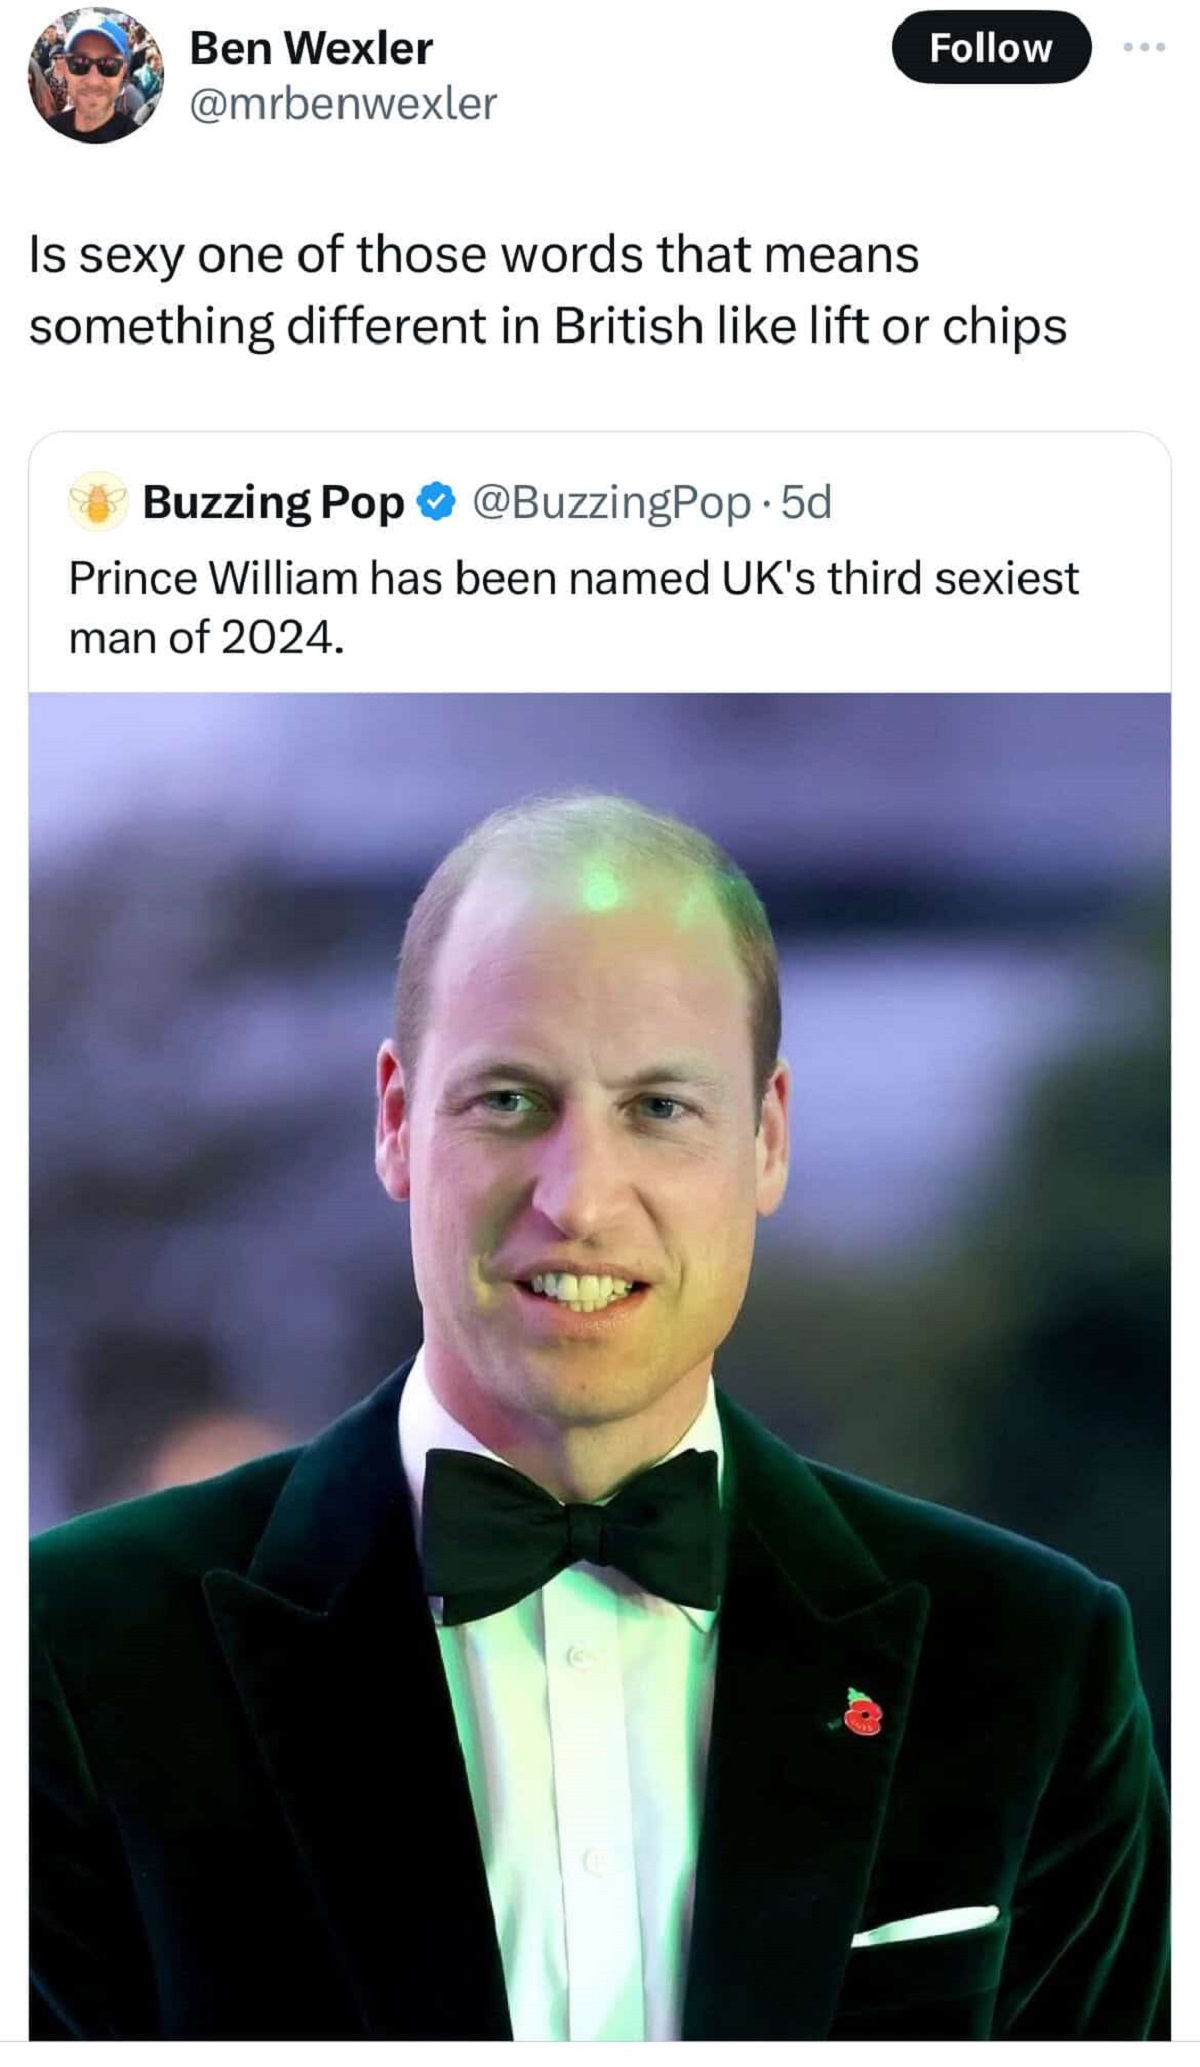 prince william earthshot 2023 - Ben Wexler Is sexy one of those words that means something different in British lift or chips. Buzzing Pop .5d Prince William has been named Uk's third sexiest man of 2024.